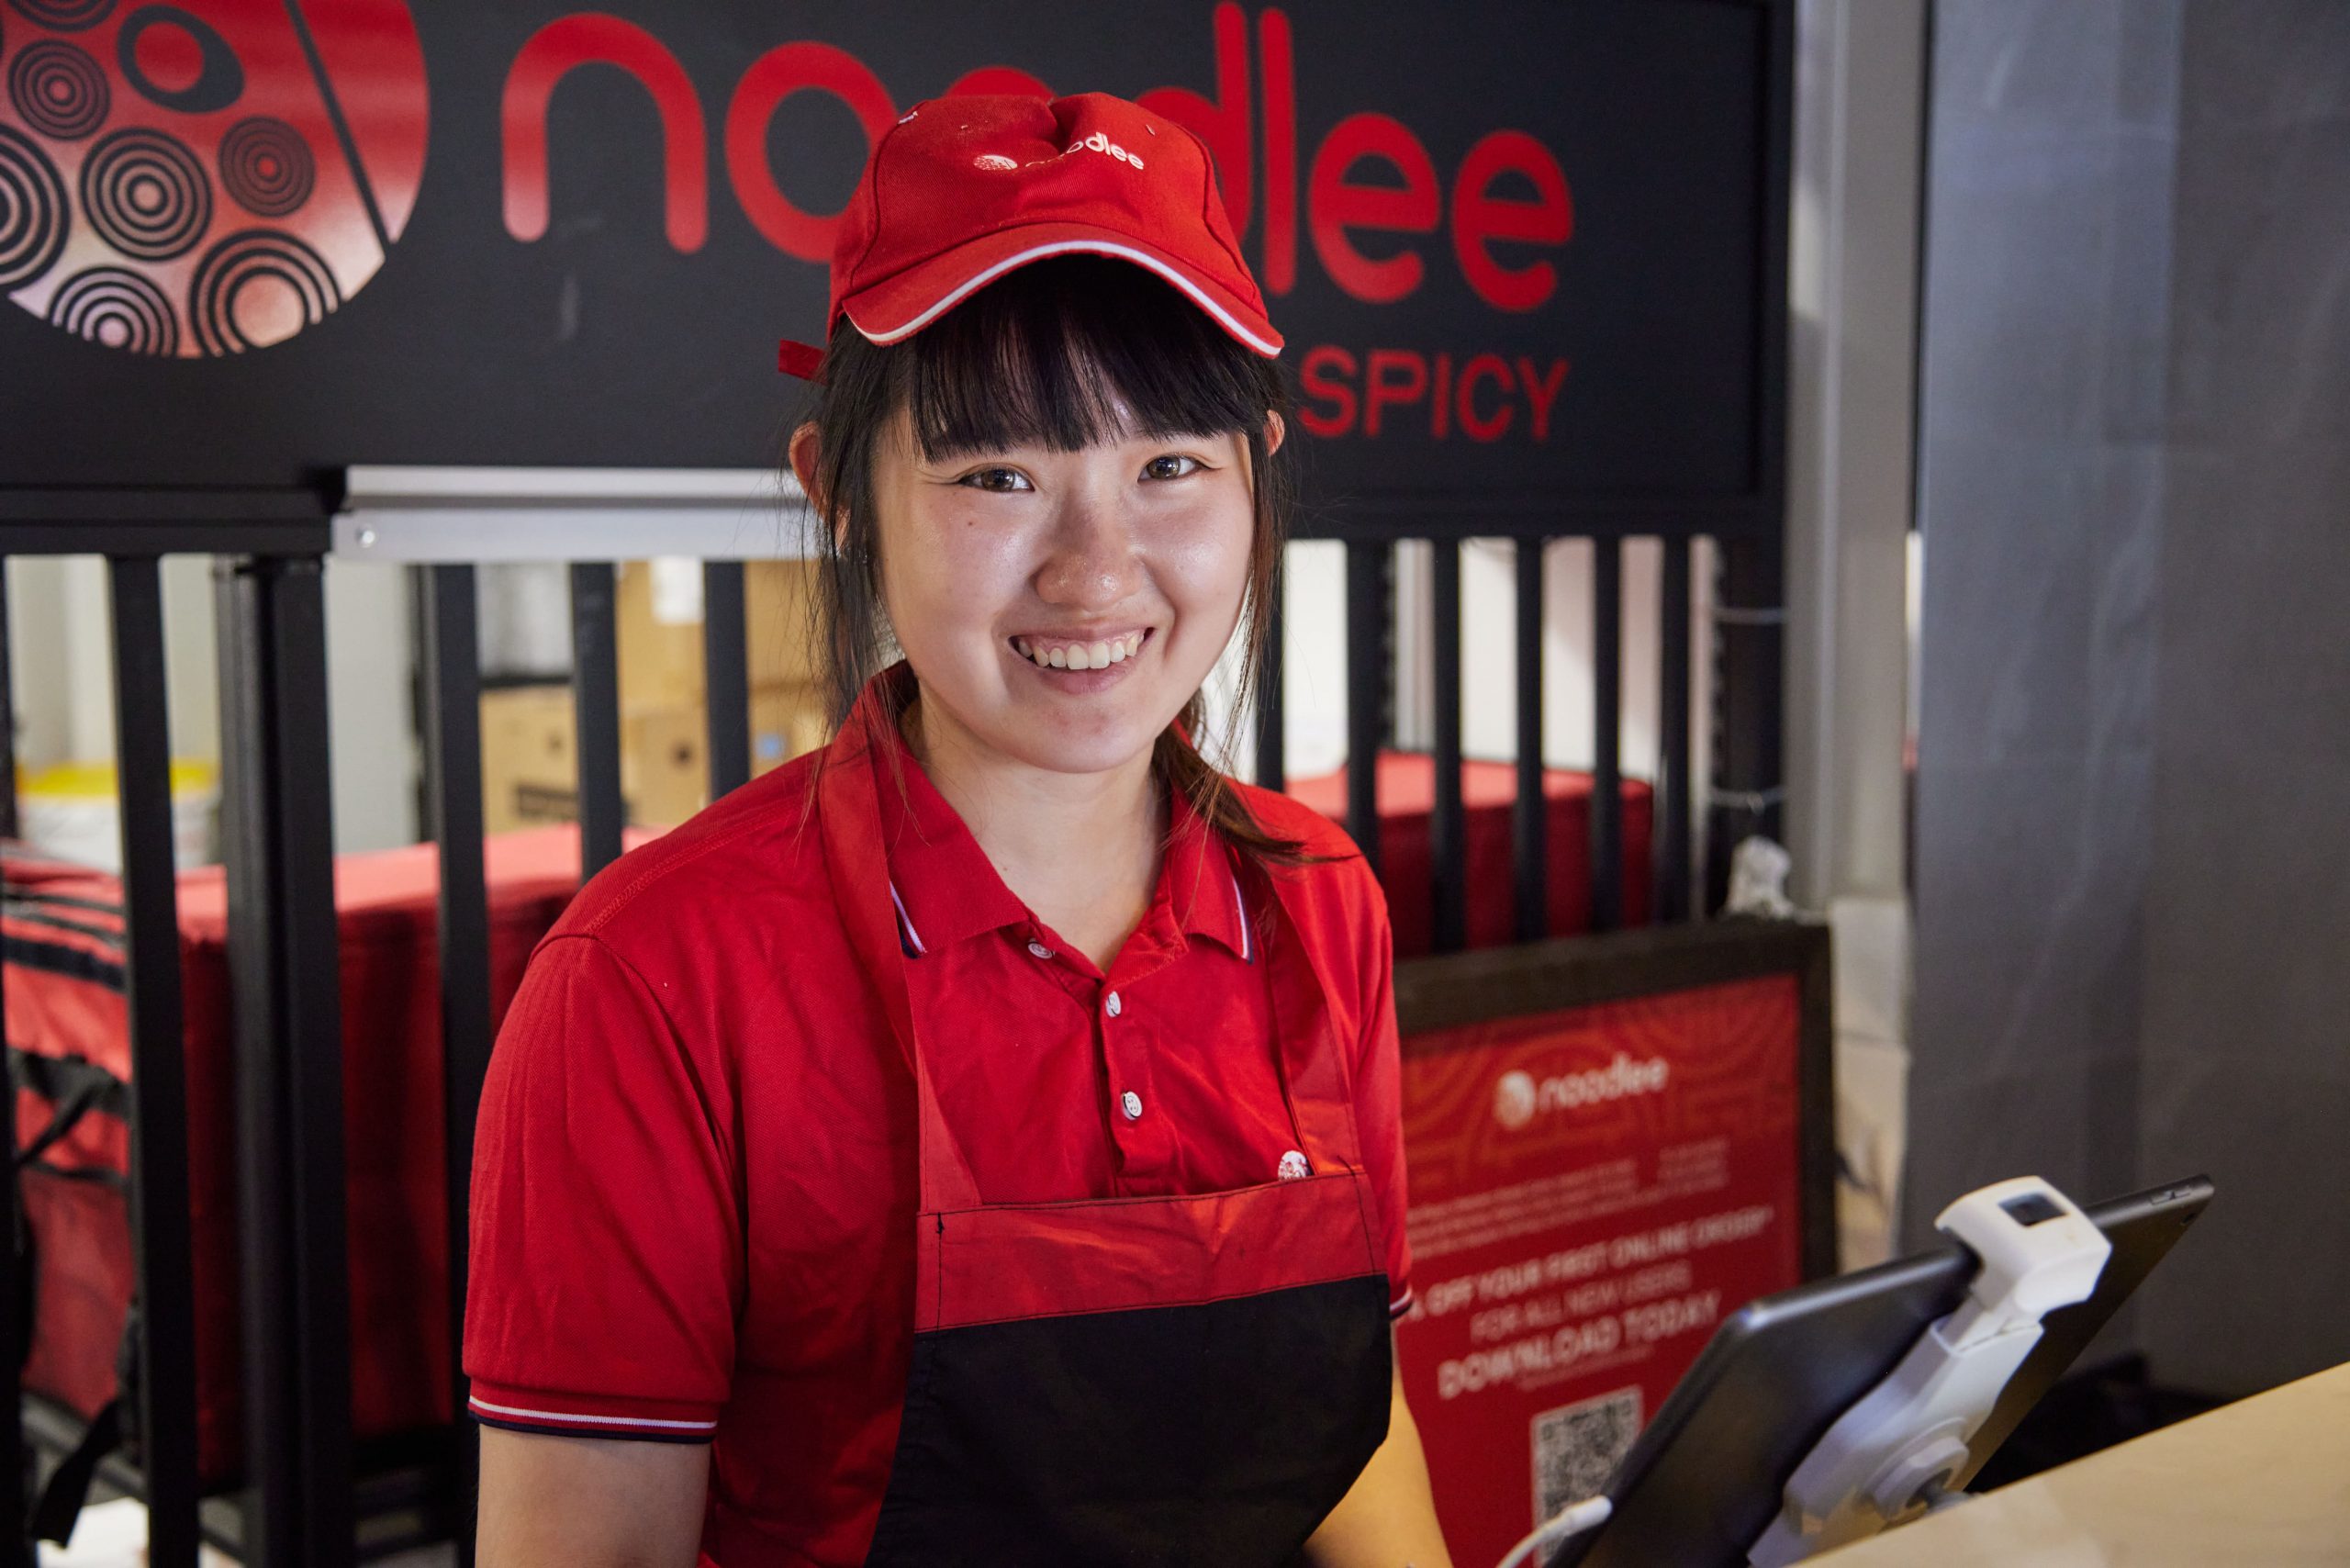 Local Chinese food chain Noodlee will be opening 15 new Cork stores this year